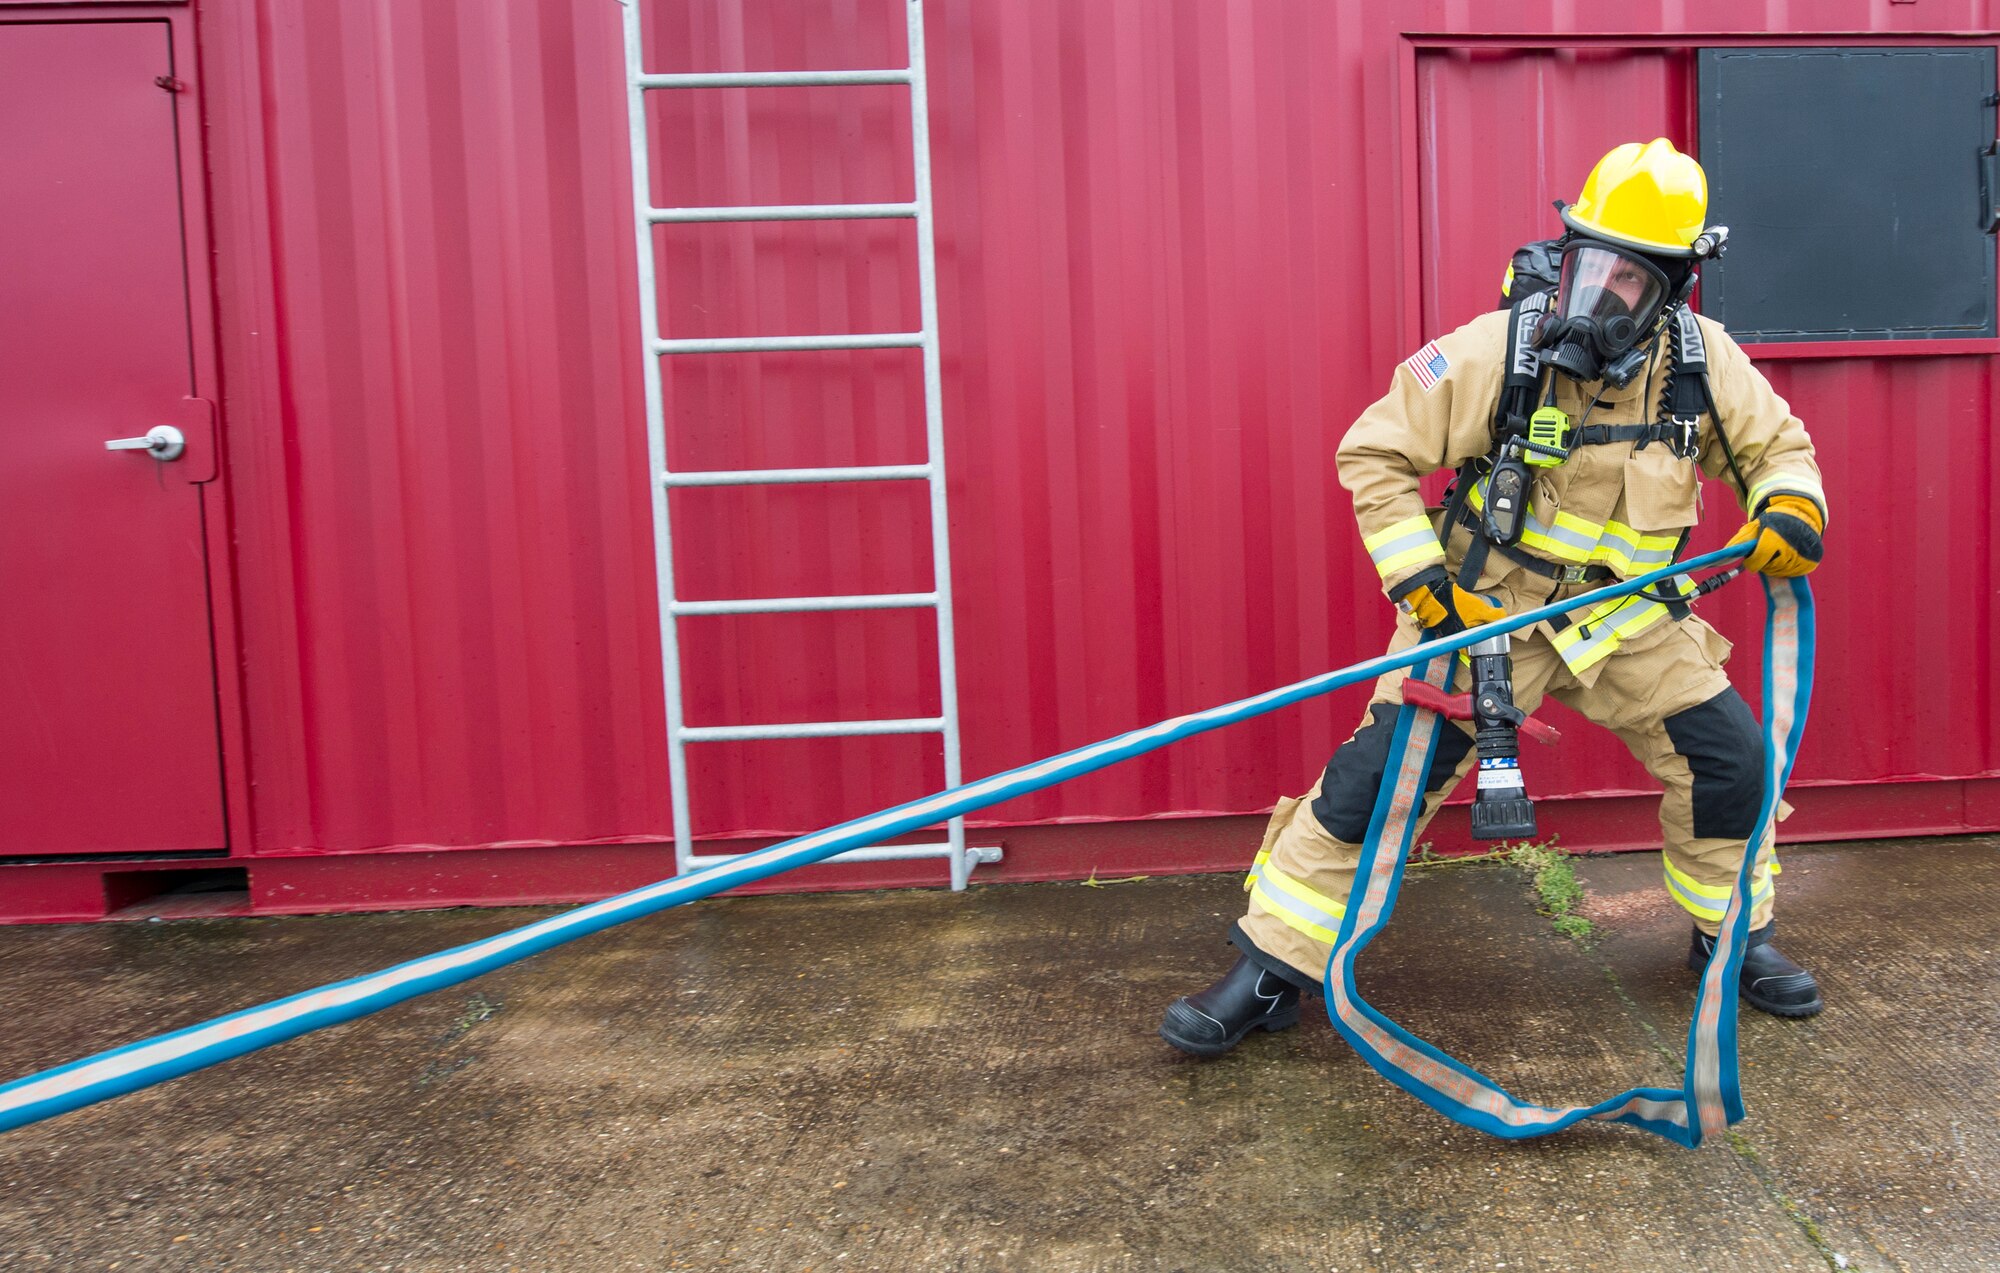 A firefighter with the 423rd Civil Engineer Squadron secures a firehose during confined spaces training at RAF Alconbury, England on March 30, 2020. This type of training helps the firefighters maintain readiness and stay proficient in their craft. (U.S. Air Force photo by Master Sgt. Brian Kimball)